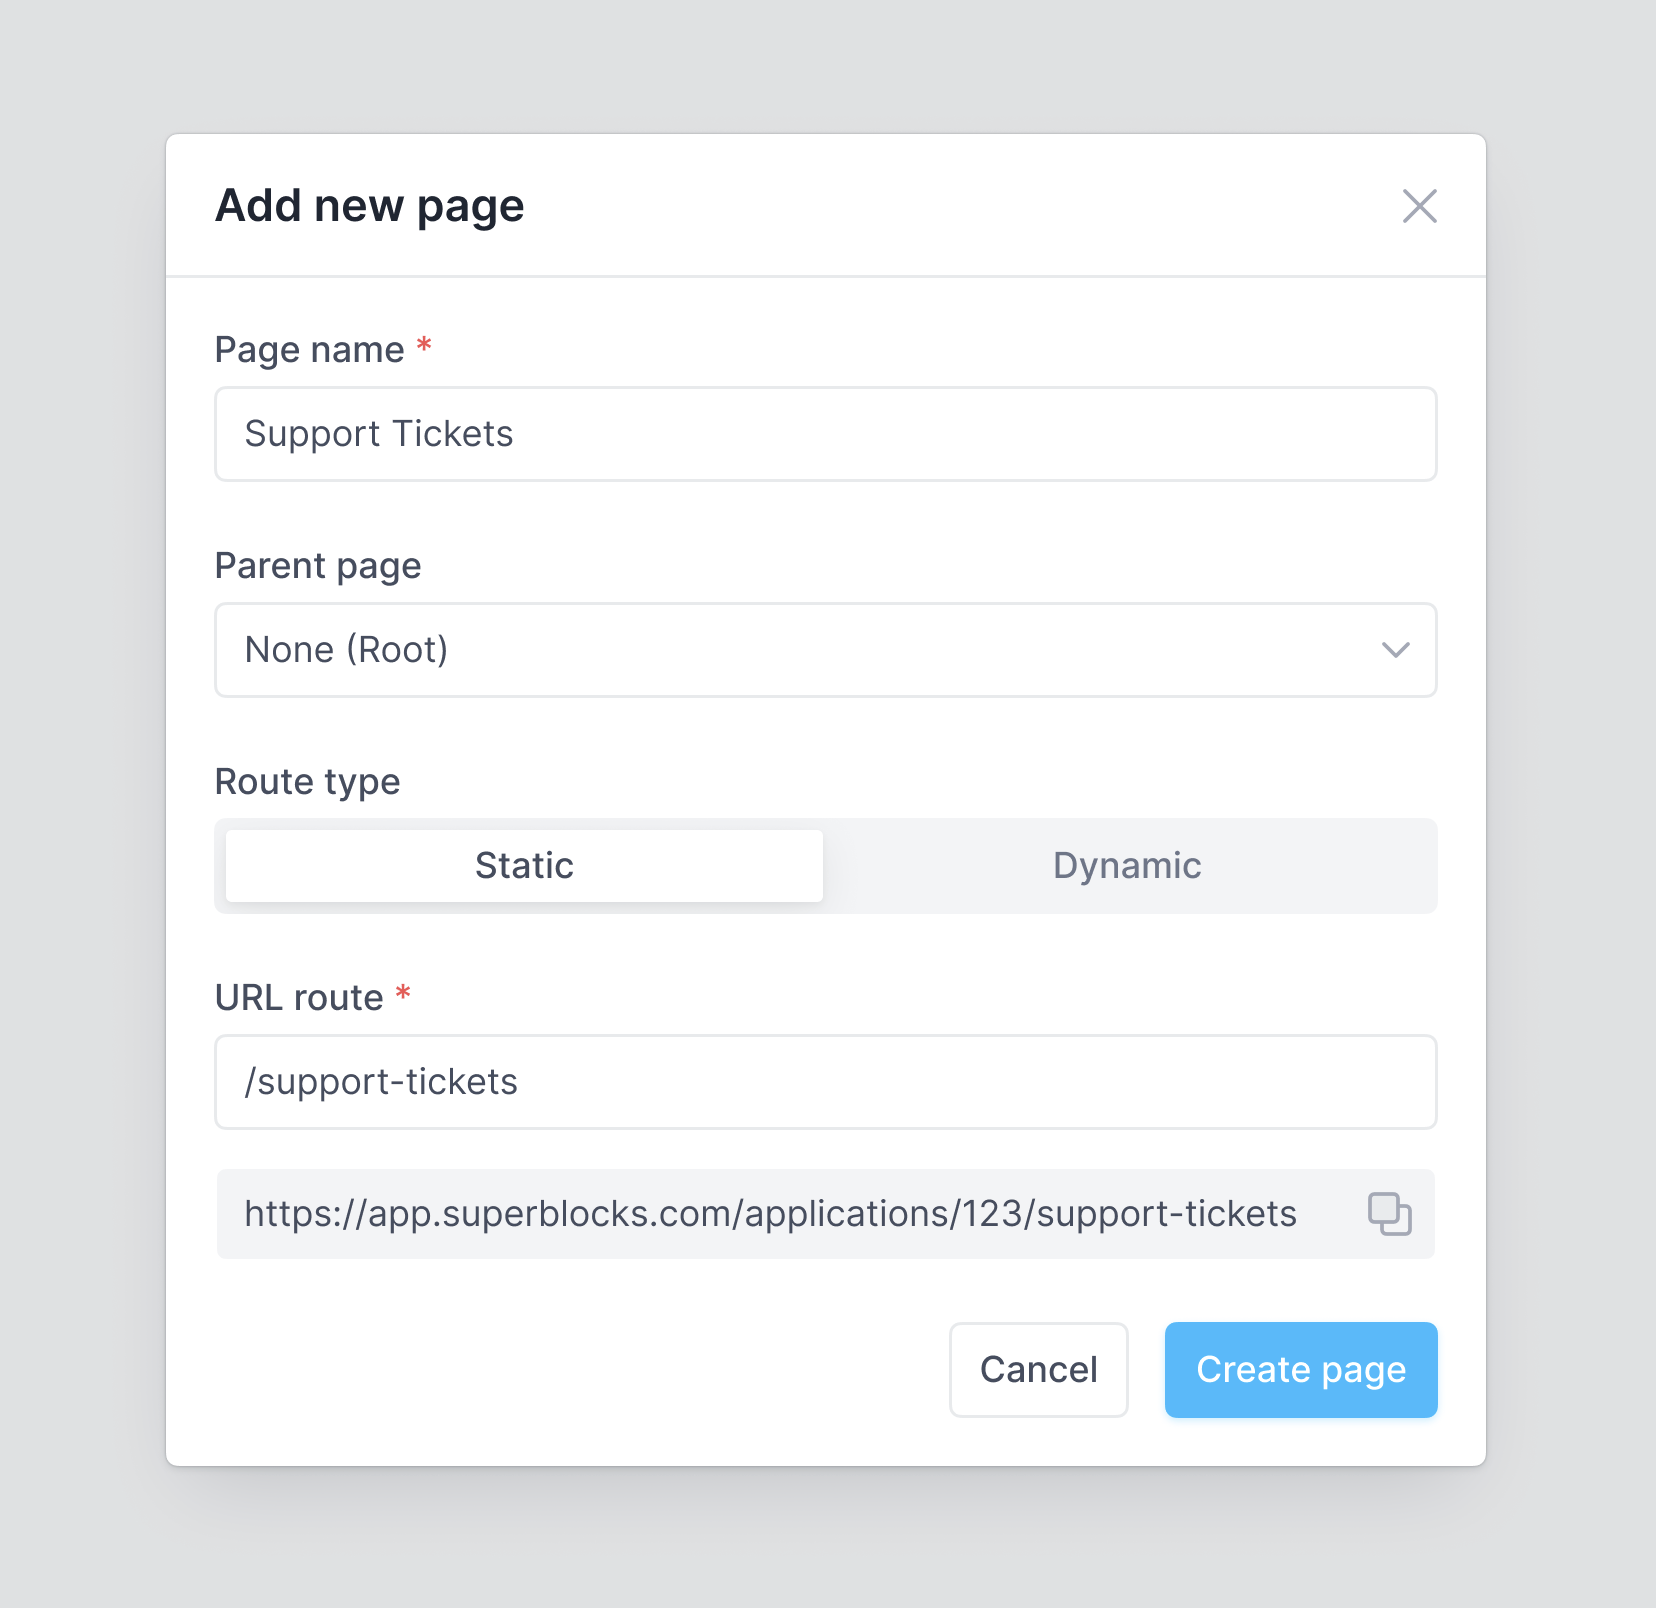 Configure the details for your new page